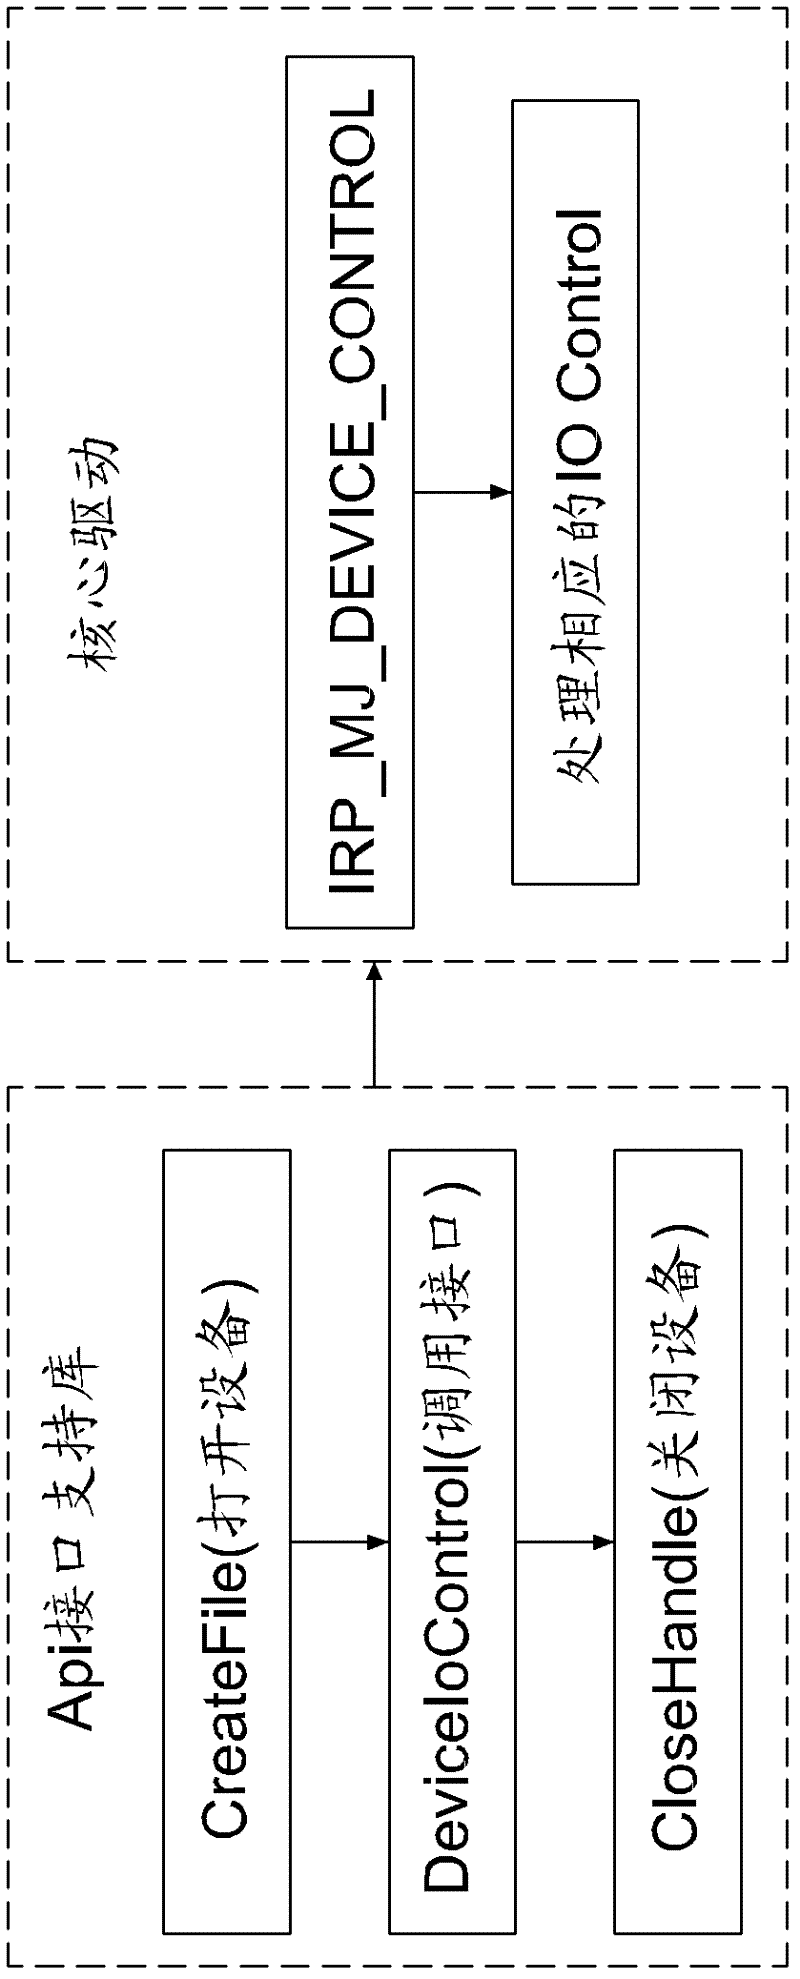 A Disk Protection System Based on Write Filter Technology